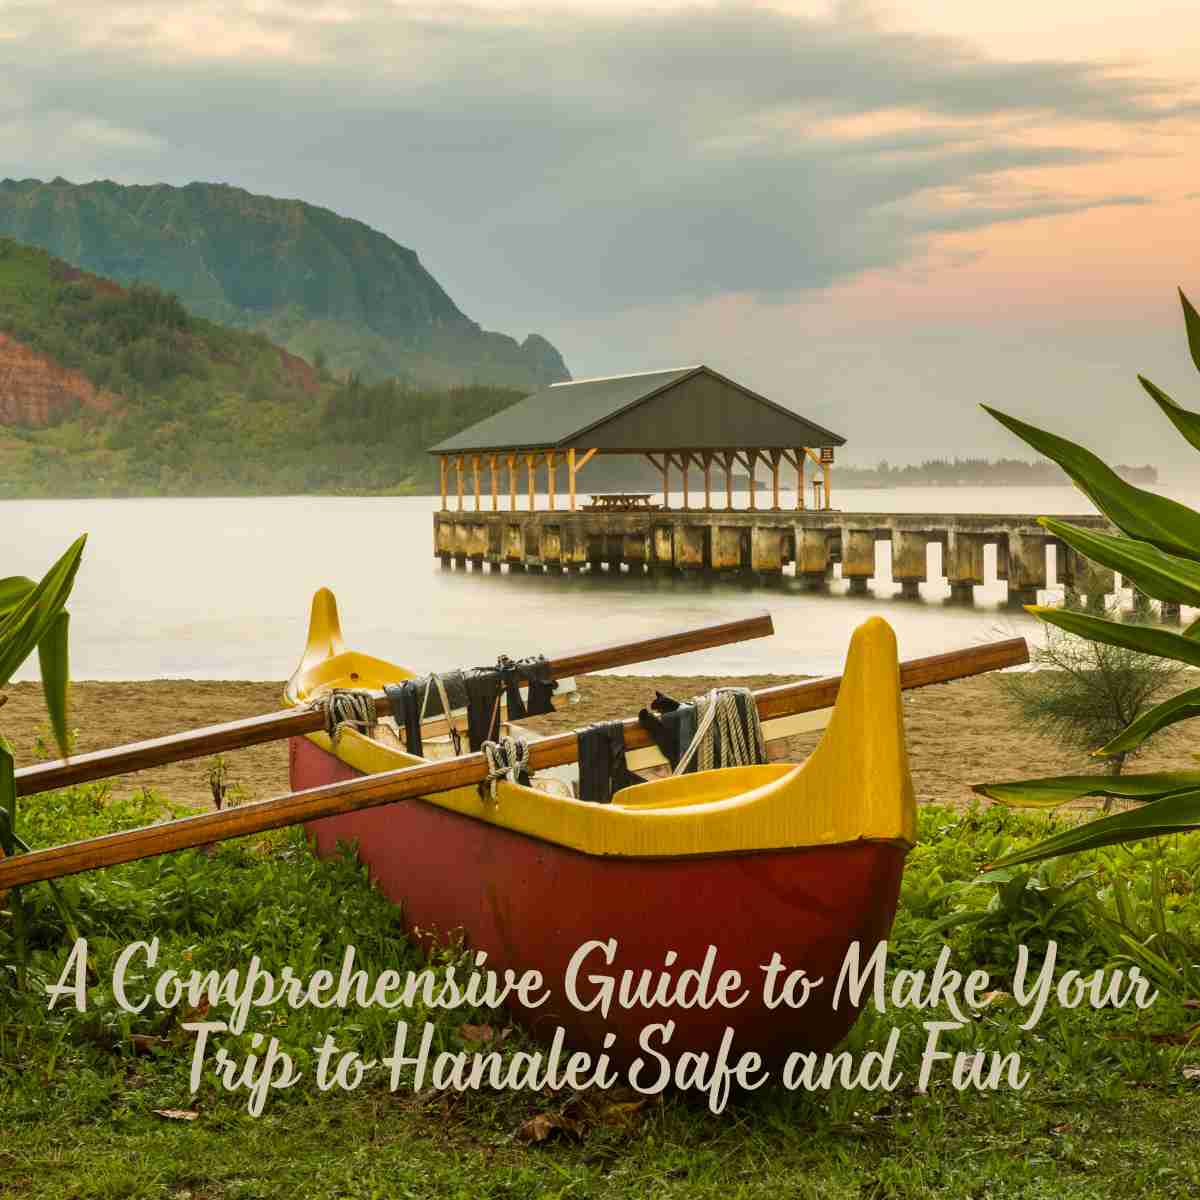 Make Your Trip to Hanalei Safe and Fun